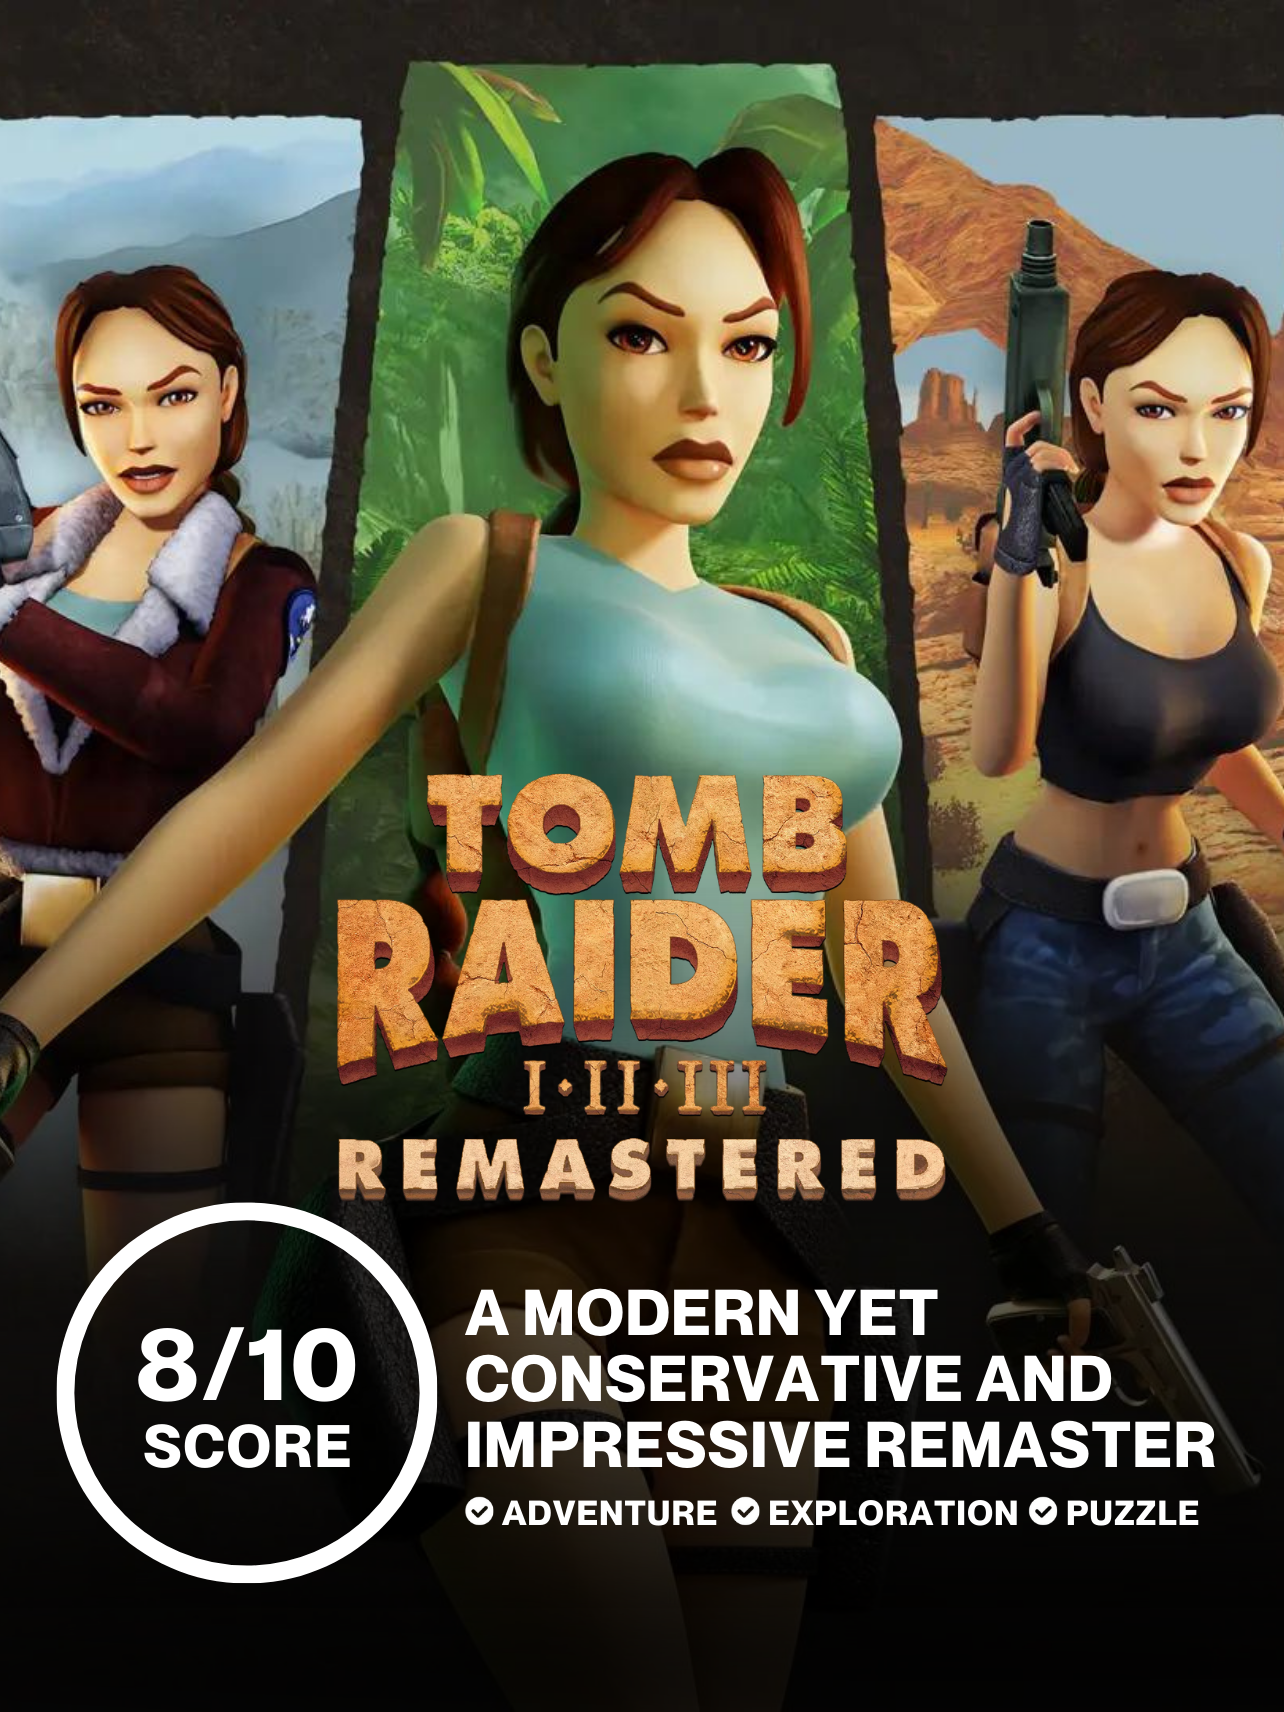 A modern yet conservative and impressive remaster  Review - Tomb Raider  I-III Remastered - Tomb Raider I-III Remastered Starring Lara Croft - TapTap